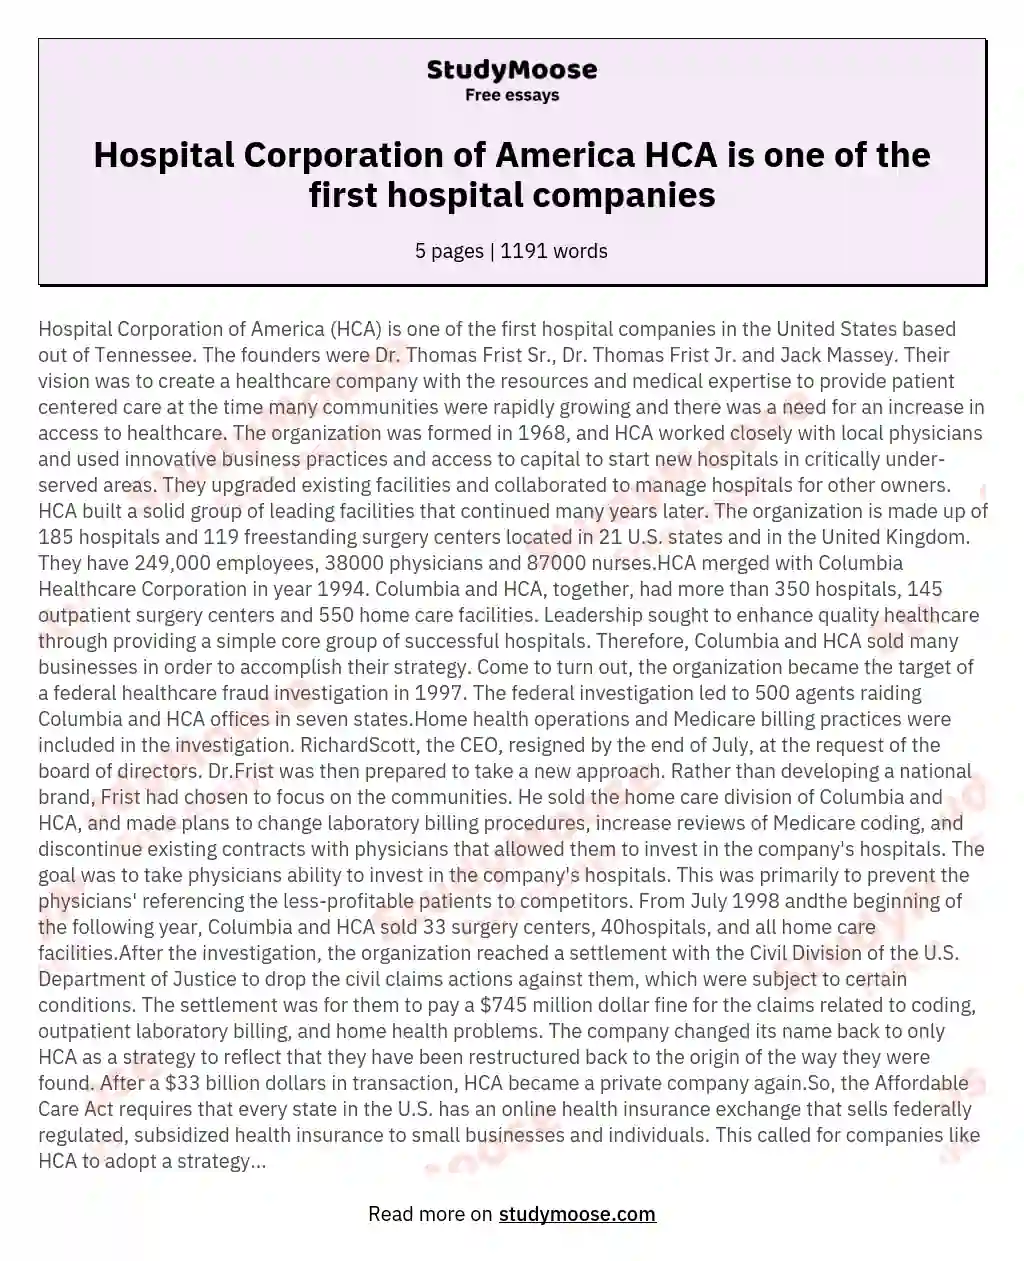 Hospital Corporation of America HCA is one of the first hospital companies